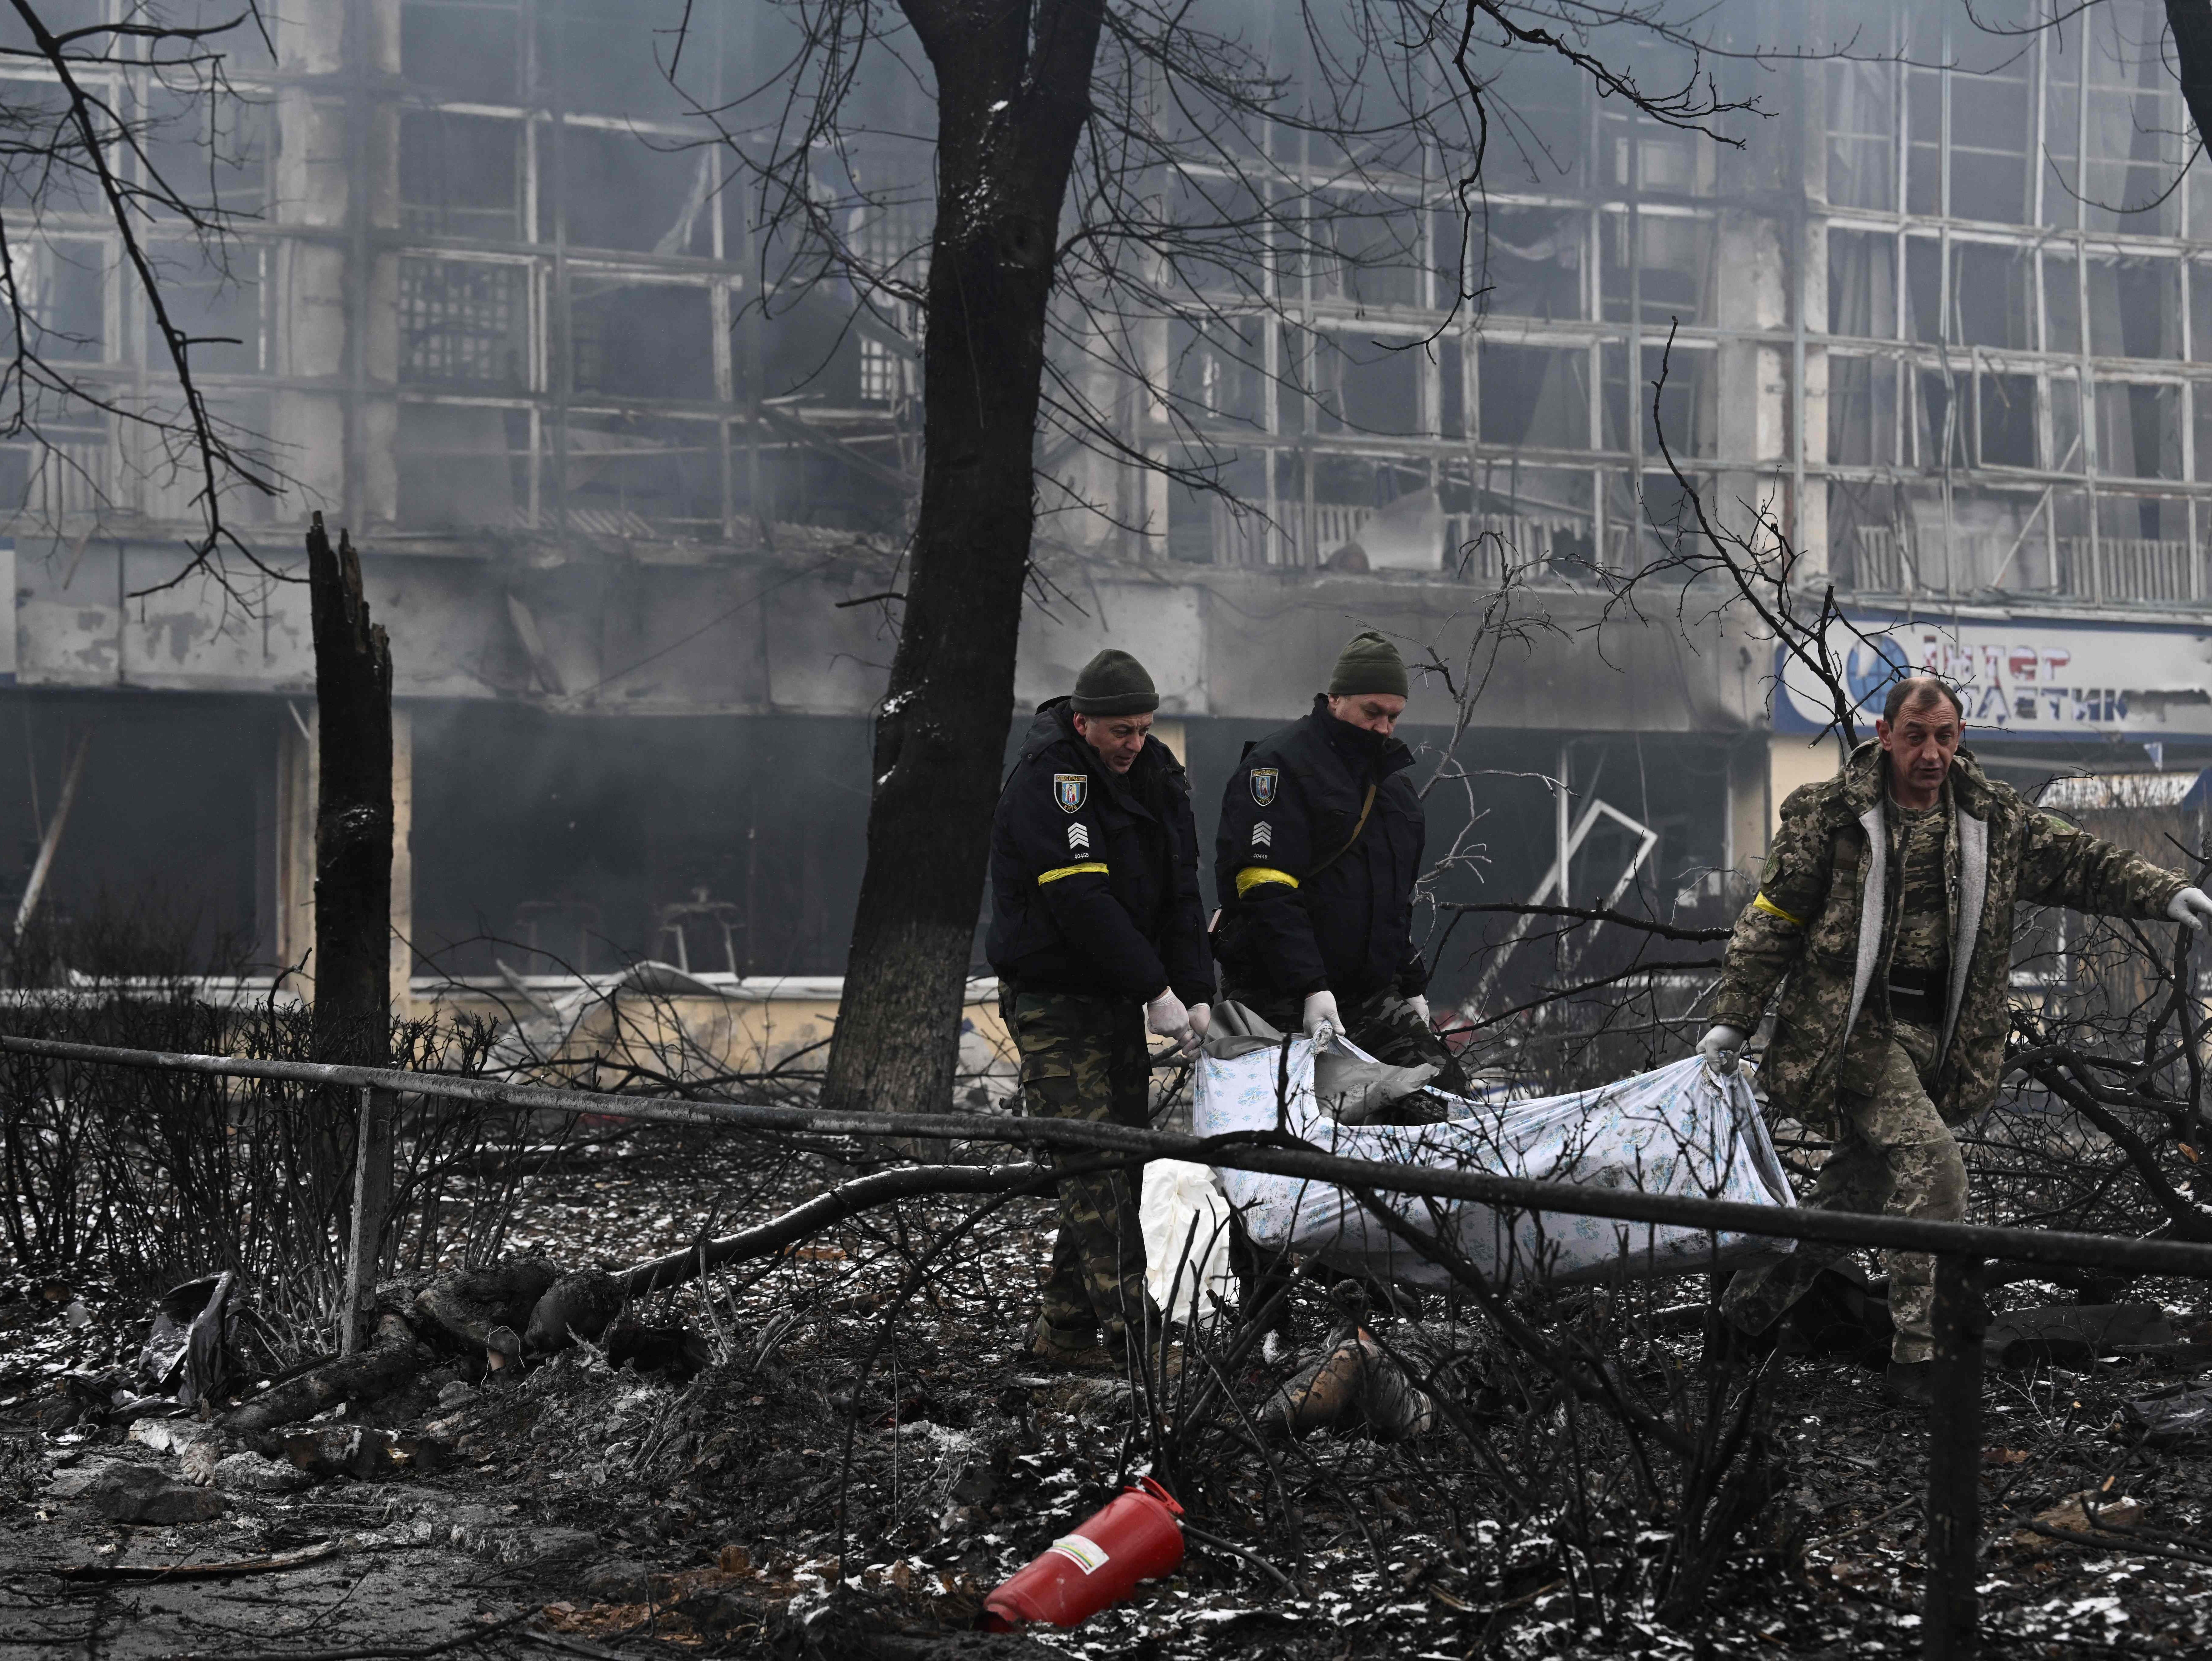 Several people died when an air strike hit Kyiv’s main television tower